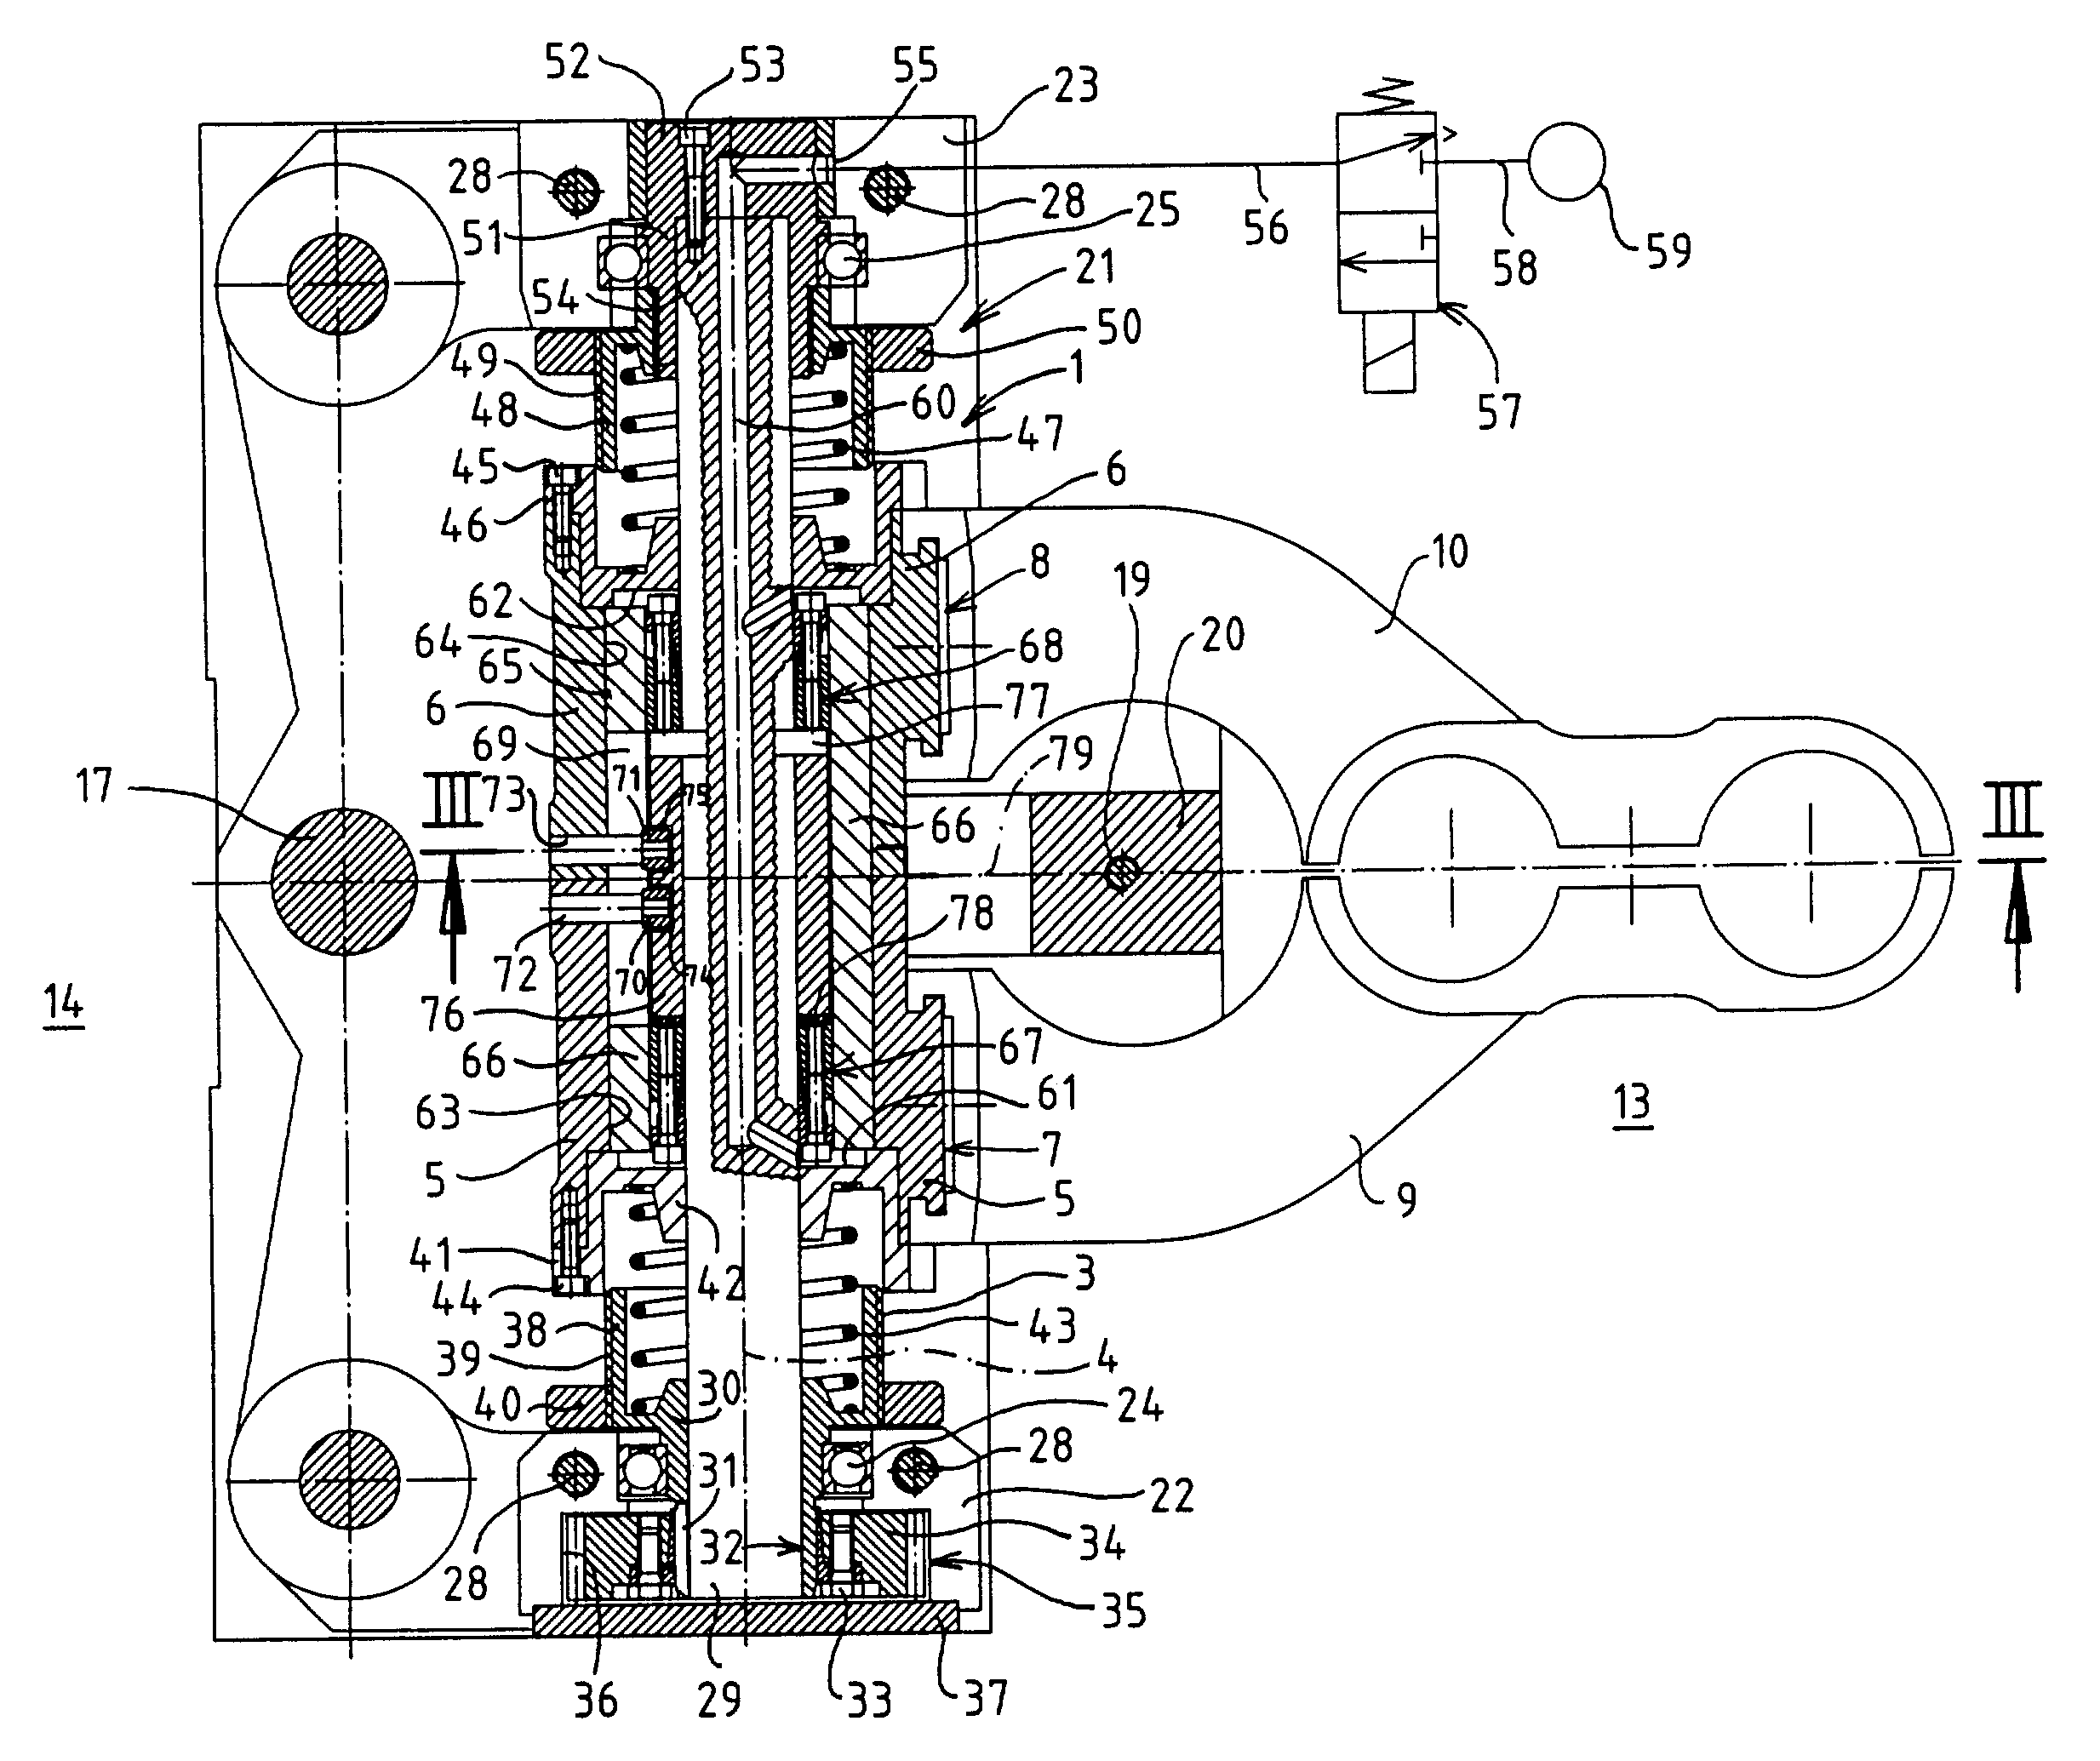 Inverter mechanism for a glass forming machine